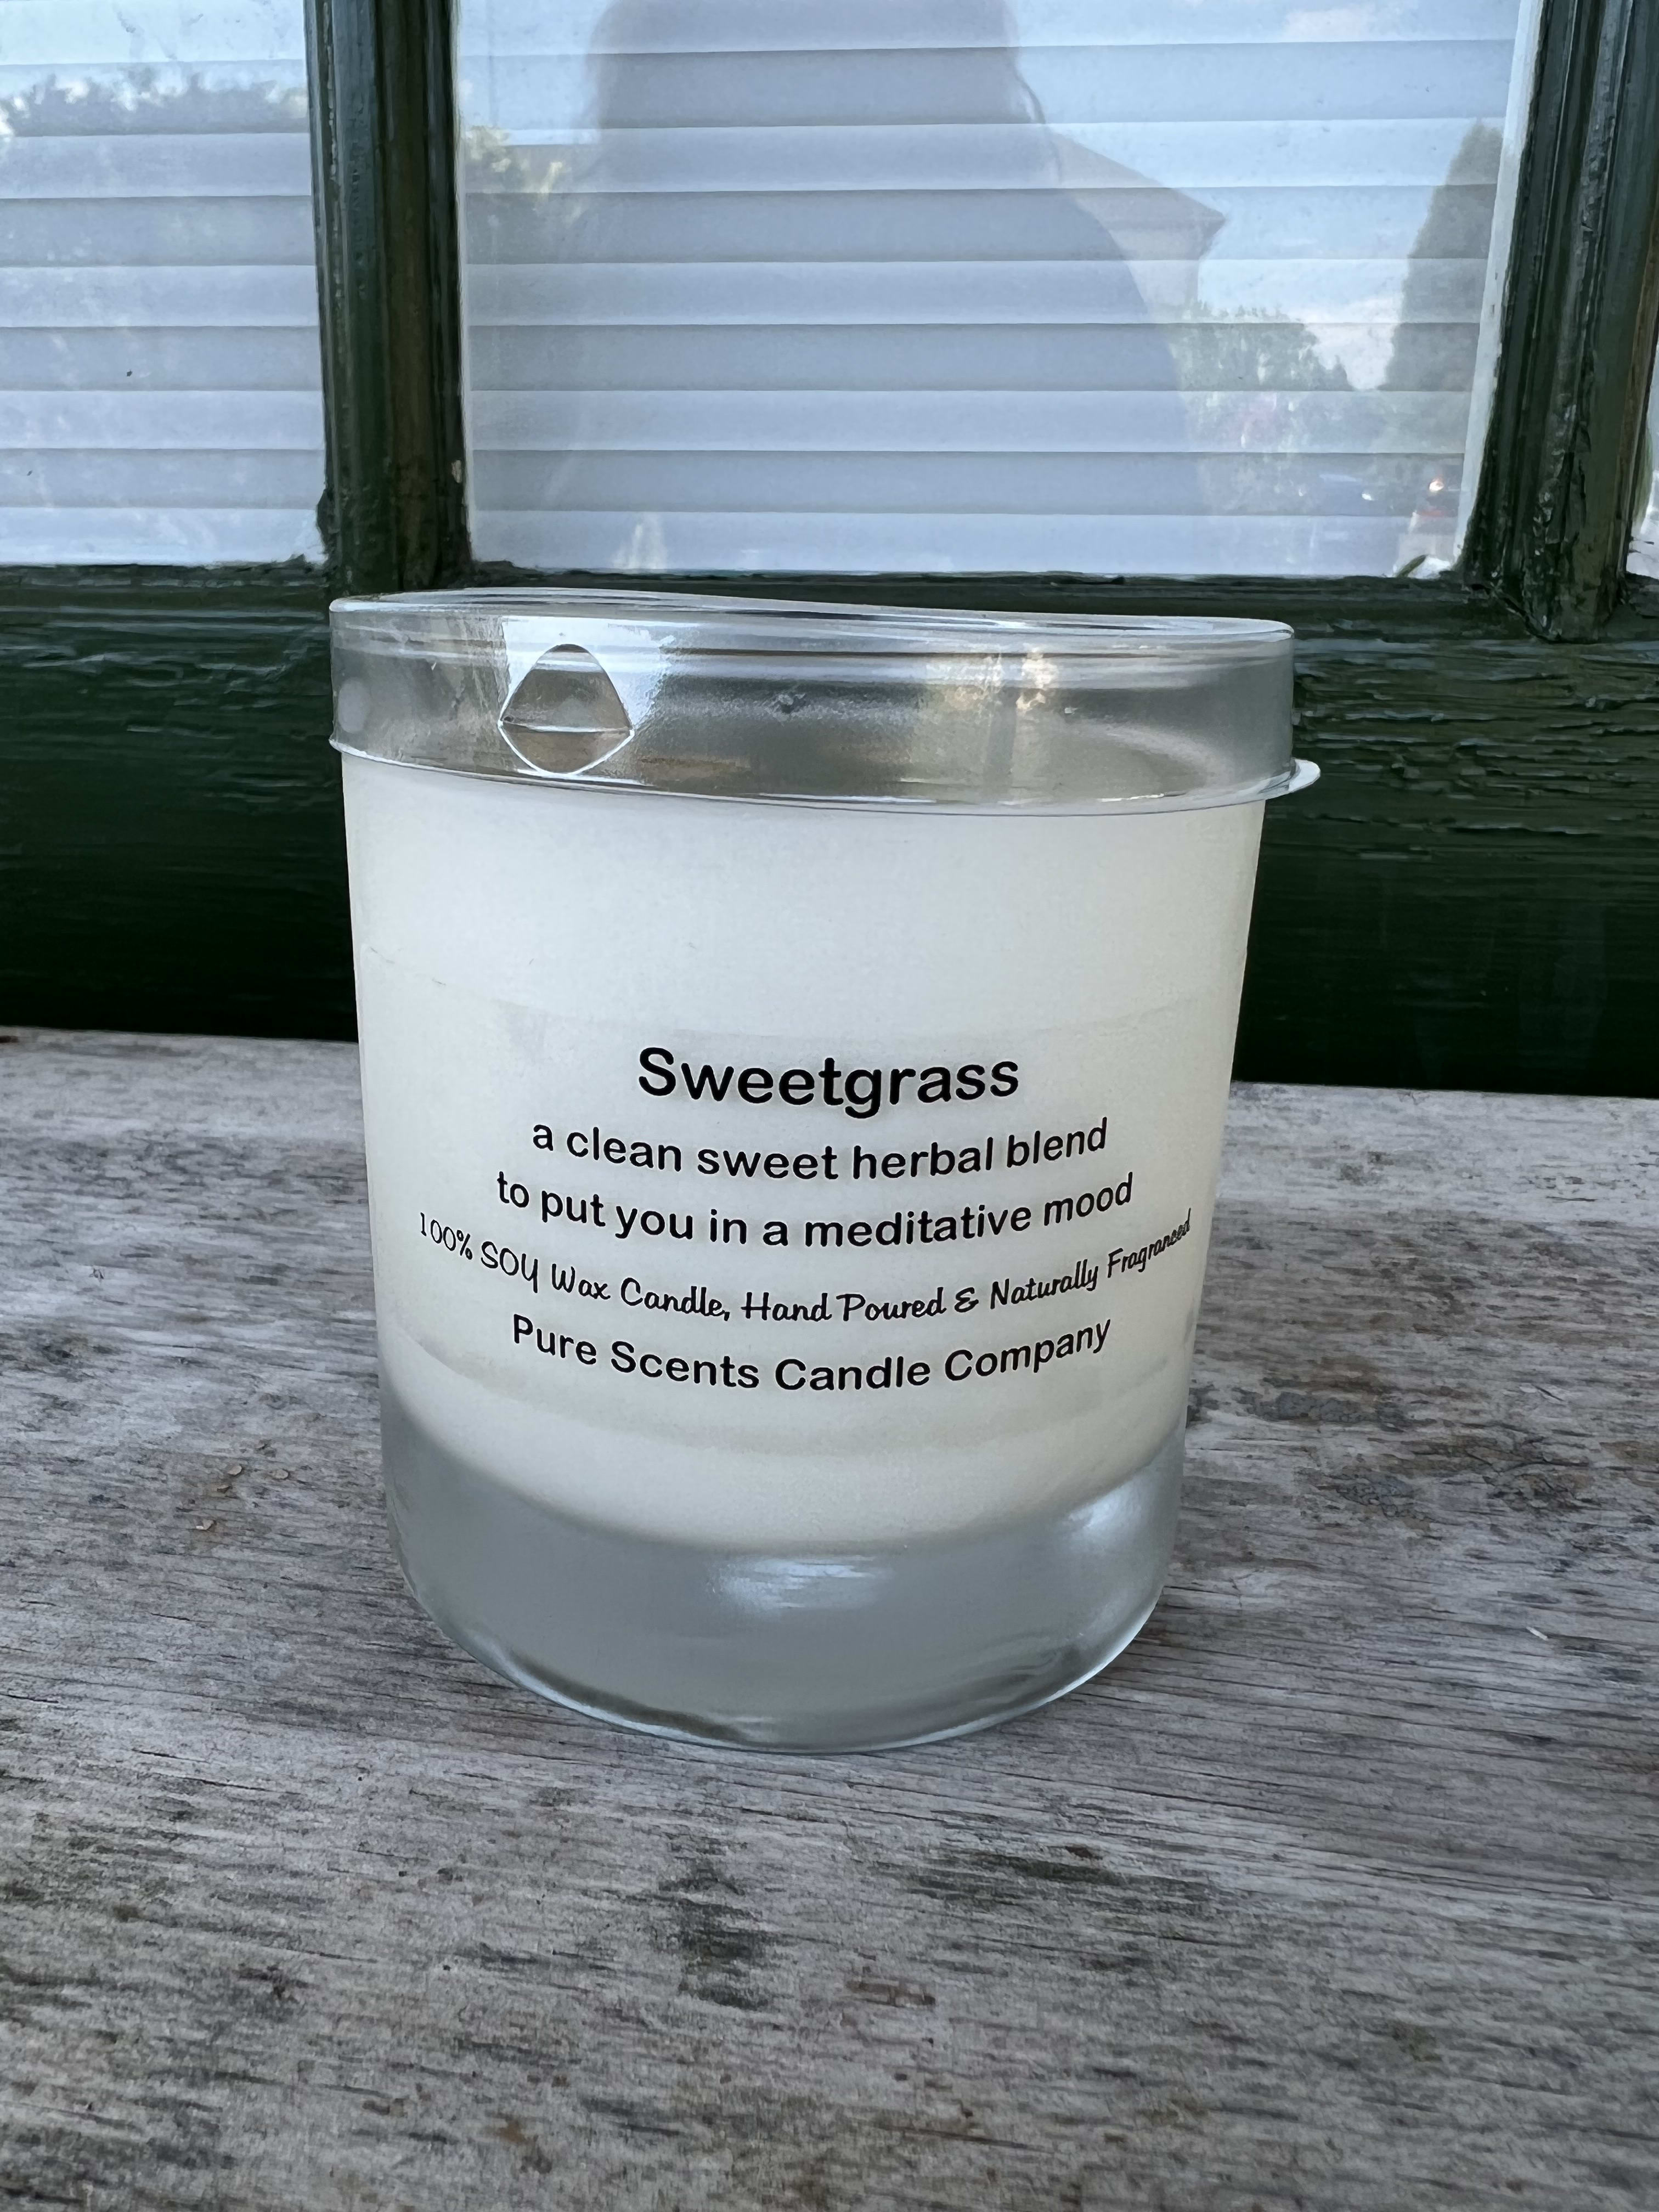 Pure Scents Candle Company - 9oz 100% Soy Candle- Sweetgrass - Local, hand-poured, 100% soy made with natural fragrances. Every candle smells amazing!  Perfect addition to any gift! Available for pick-up or add-on to any plant or flower arrangement for delivery. Specify scent in special instructions.